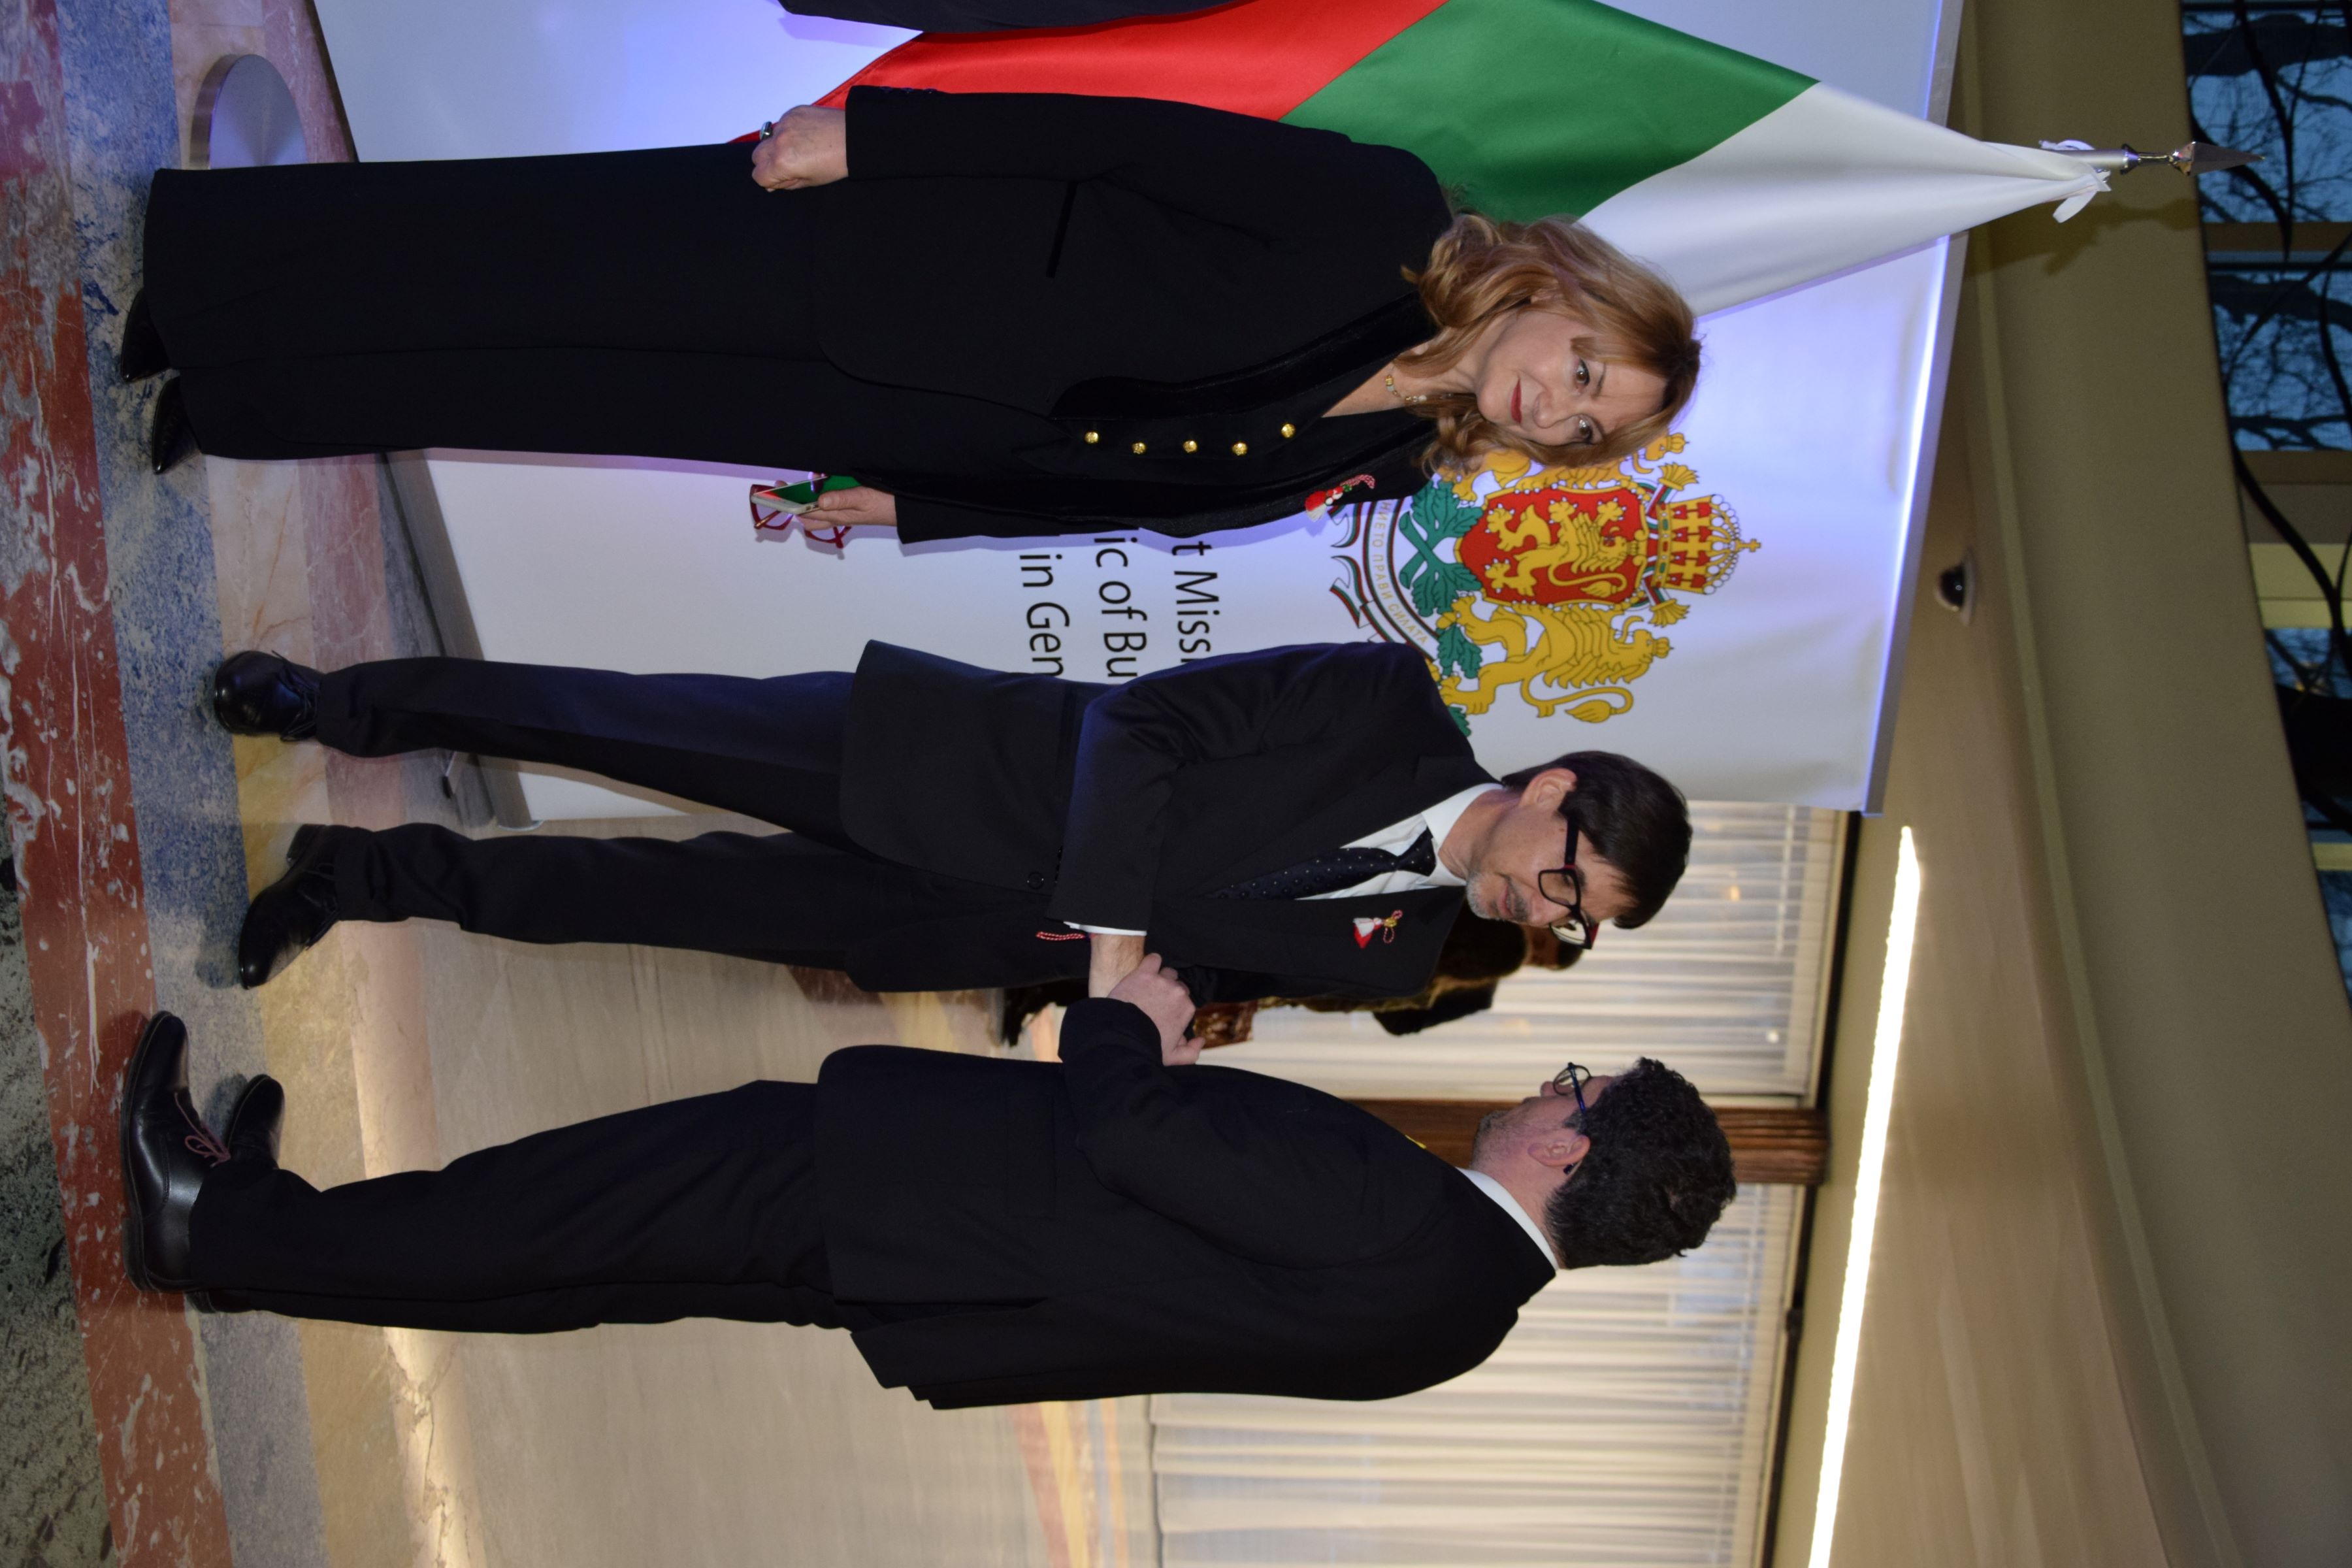 Celebration of Bulgaria’s National Day in the premises of the World Intellectual Property Organisation /WIPO/